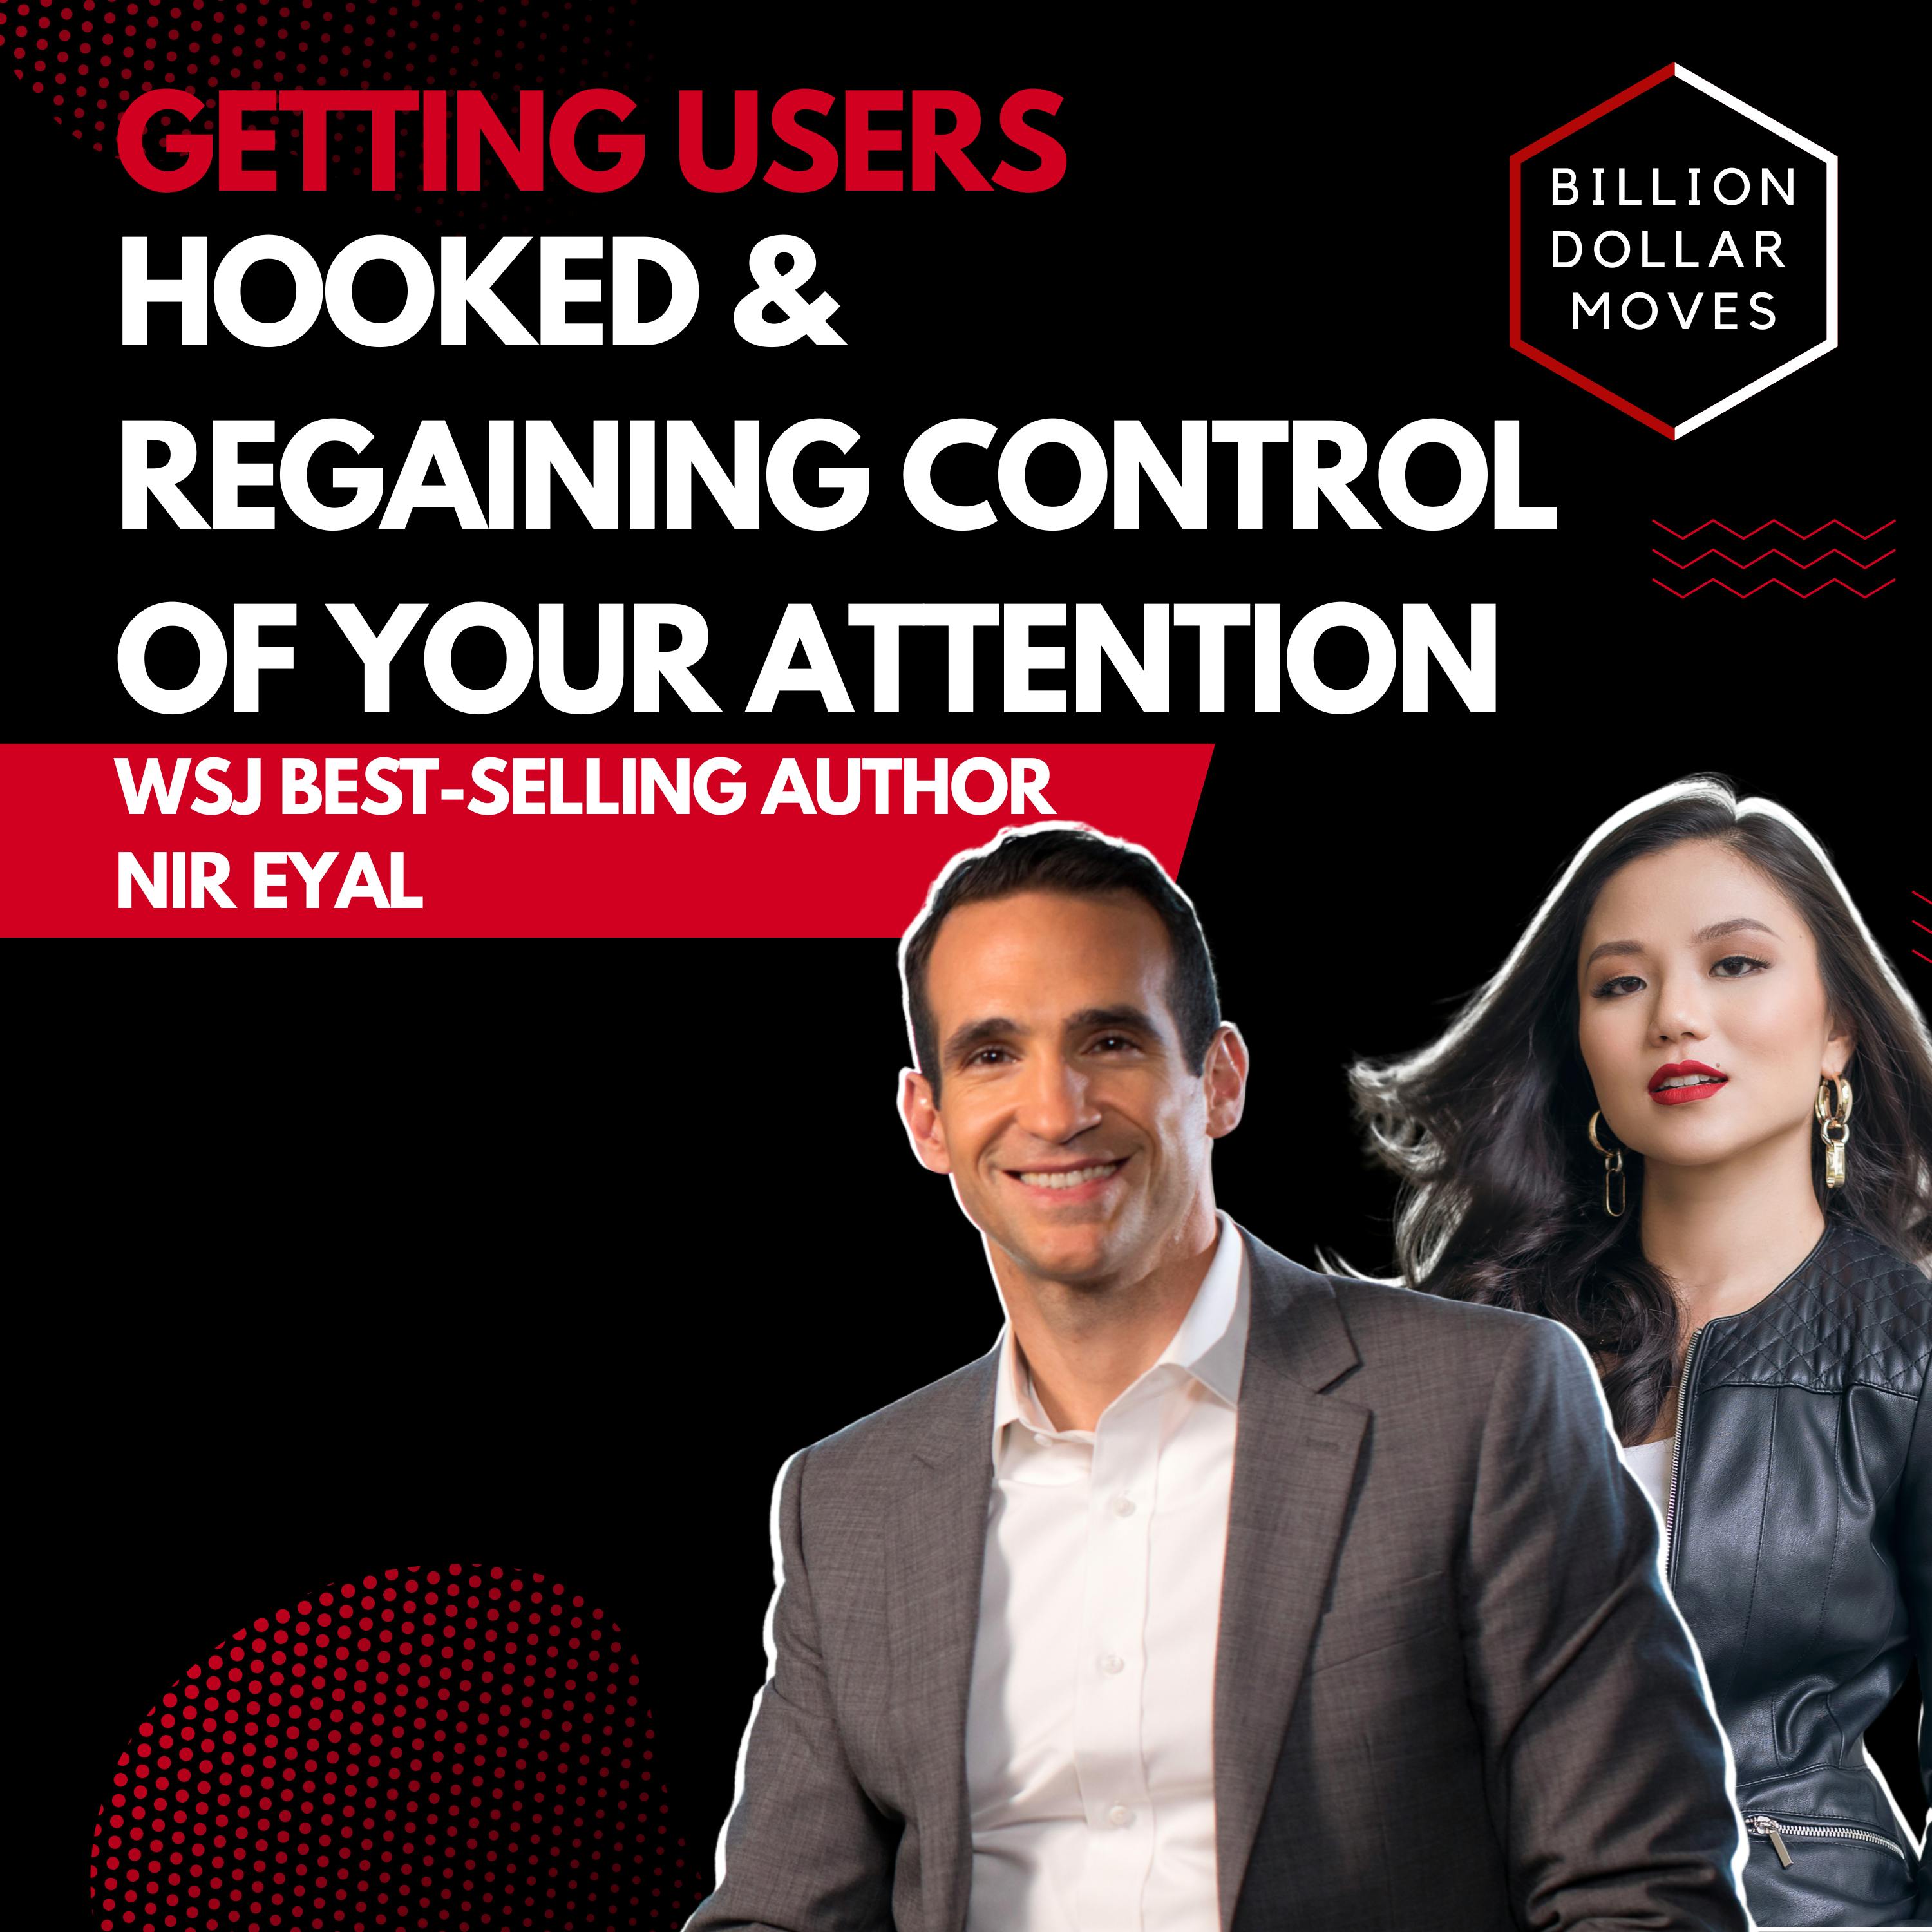 Getting Users Hooked & Regaining Control of Your Attention with Nir Eyal, WSJ Best-Selling Author of 'Hooked' & 'Indistractable'